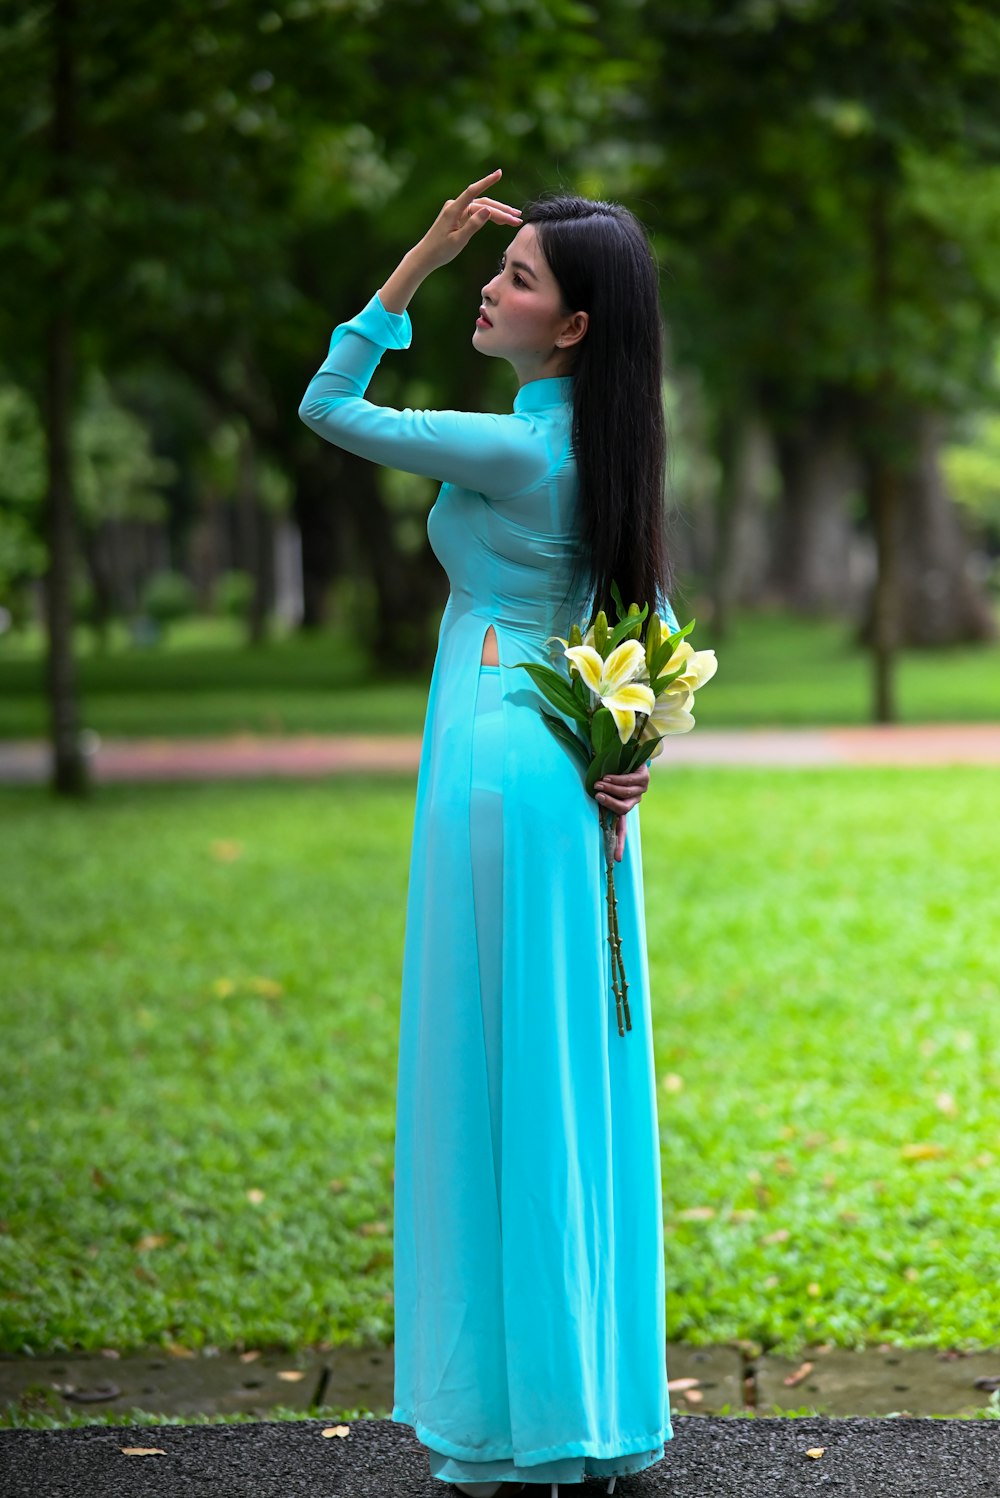 a woman in a blue dress holding a bouquet of flowers